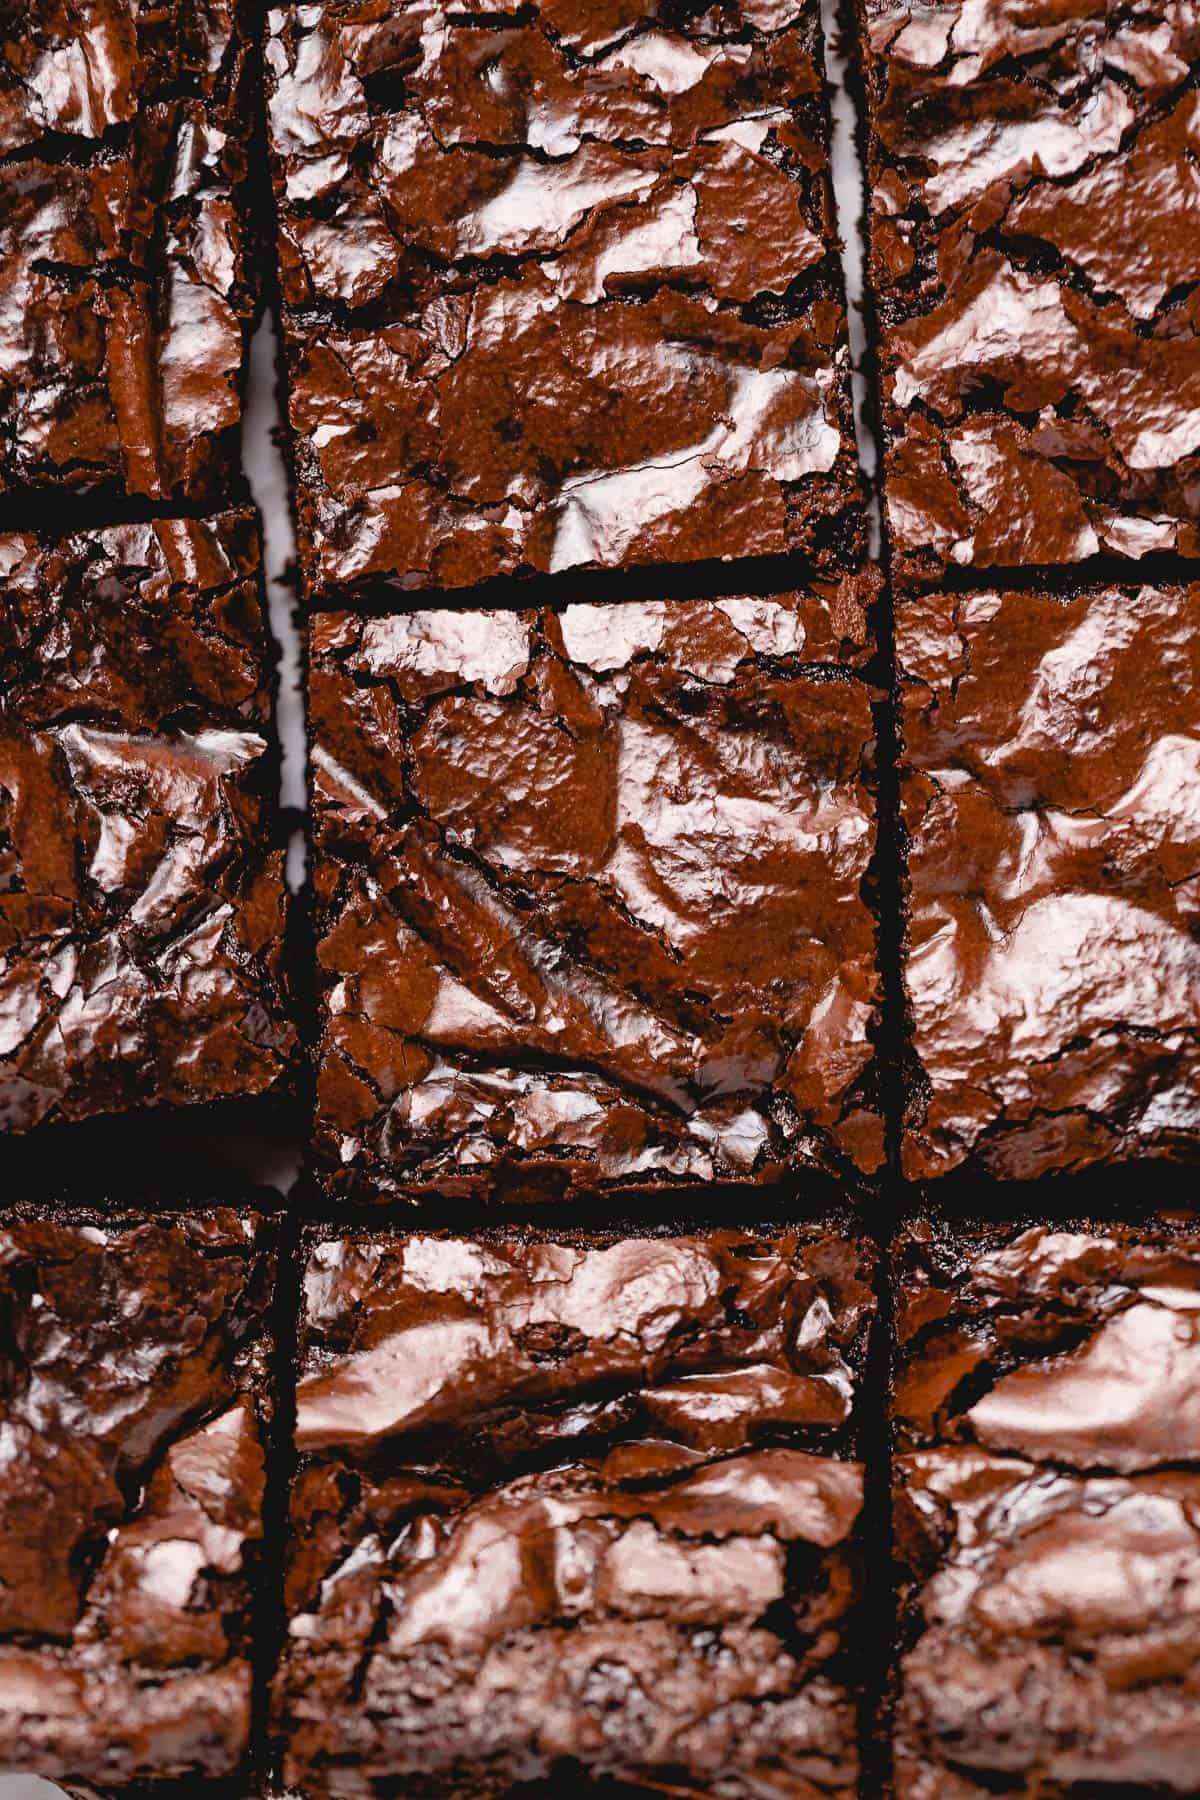 close up of finished cooled and sliced crinkly brownies